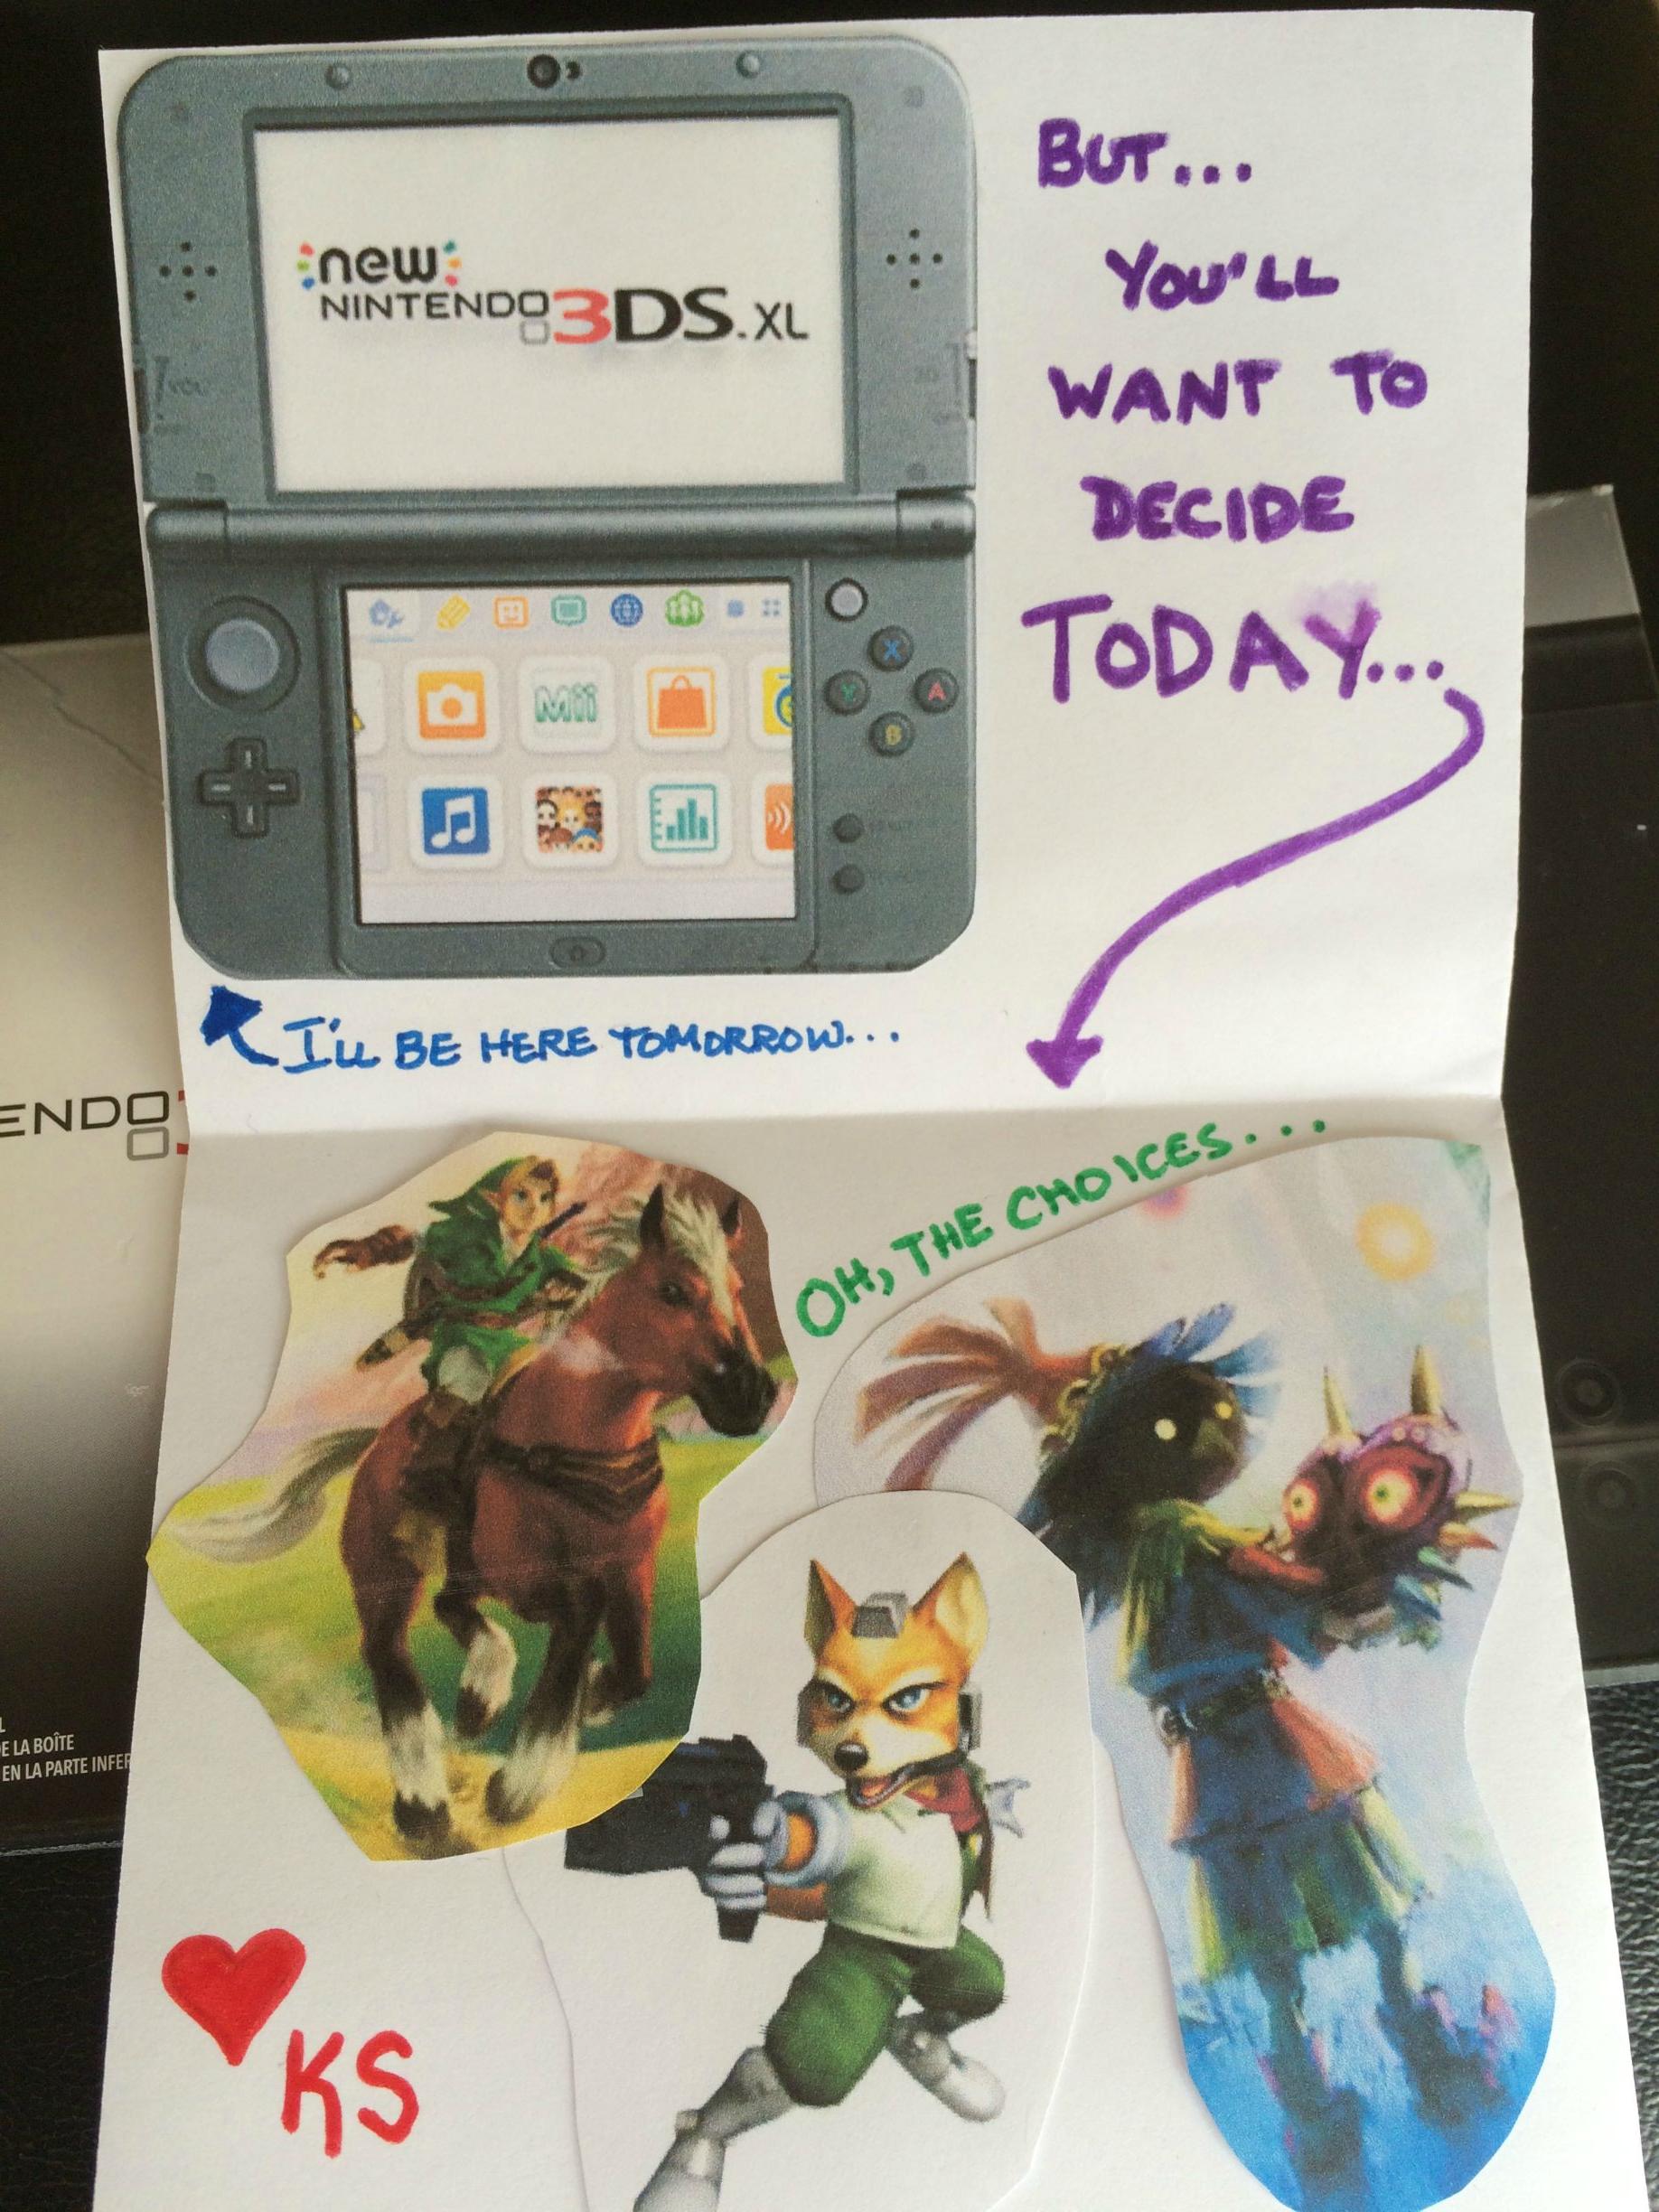 She got him a new 3DS XL and $40 to buy the game he wanted. He knows he's made the right choice proposing to her.